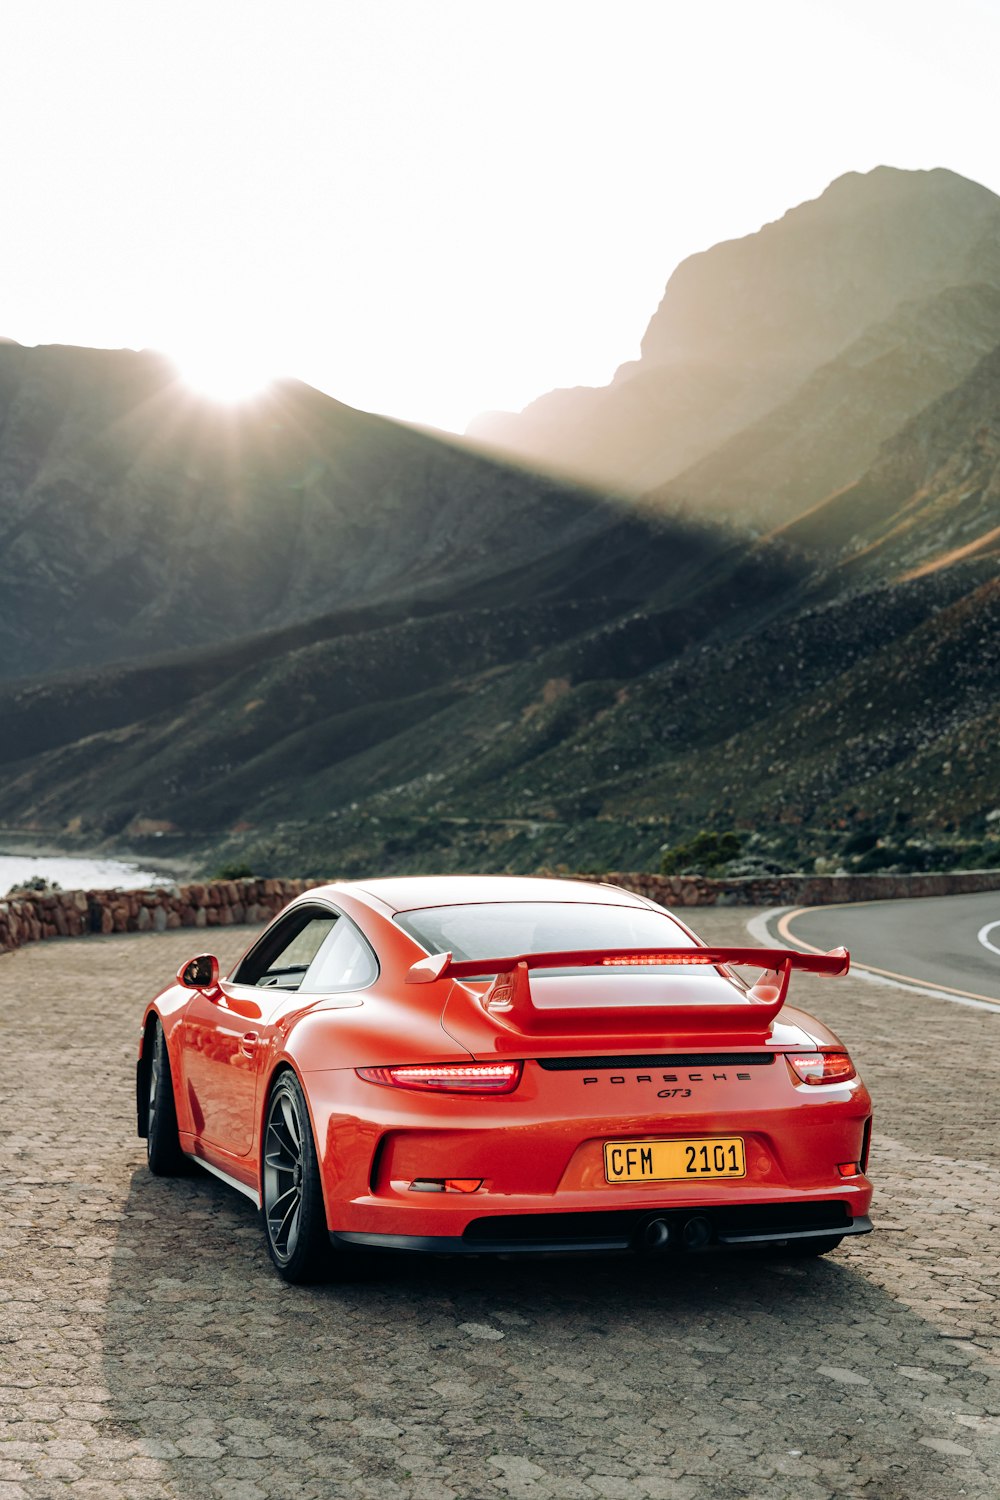 a red sports car on a road with mountains in the background